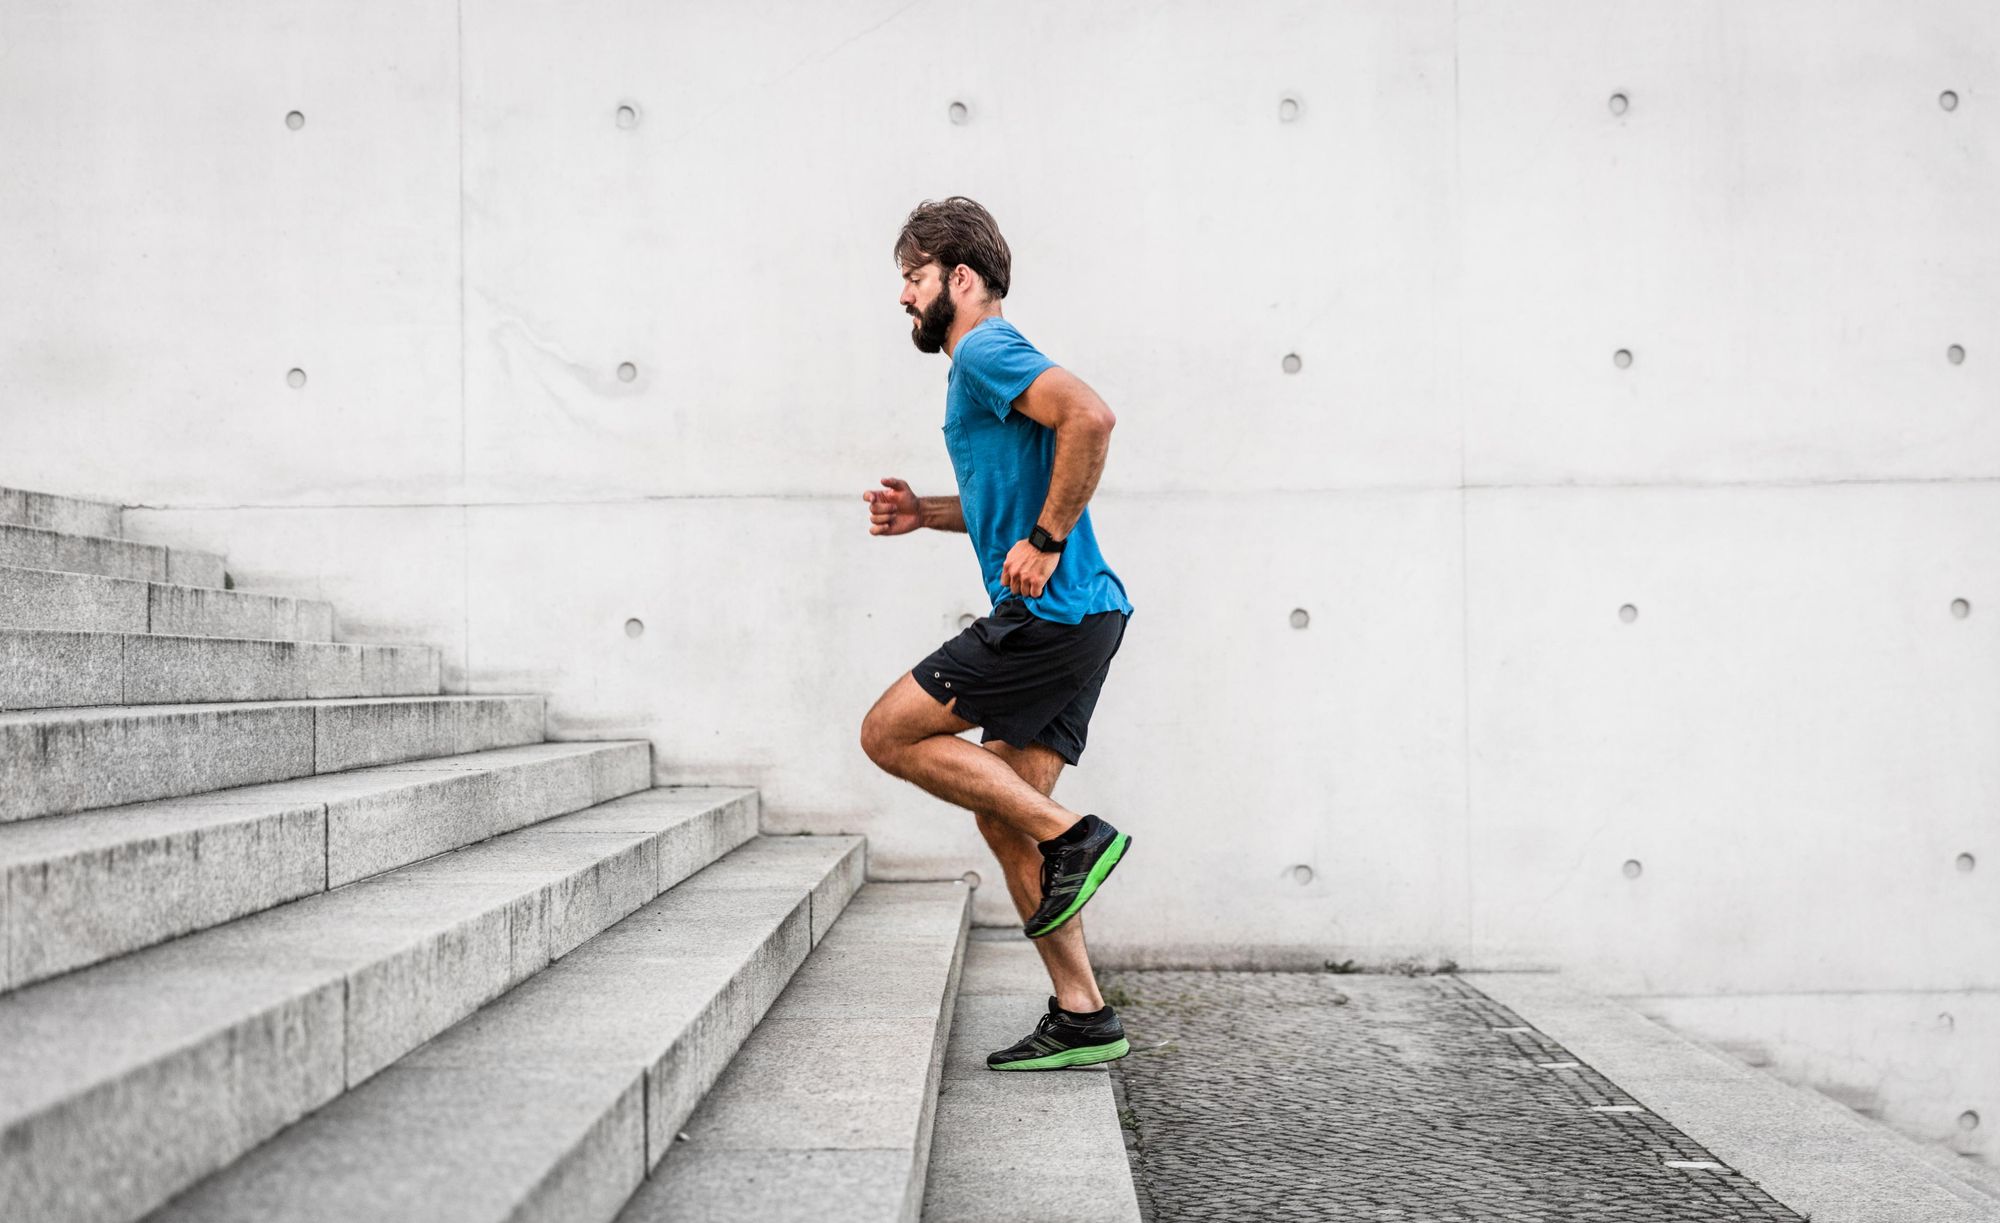 If you've got a staircase at home great, but it can be a good excuse for training outdoors, too. Photo: Getty